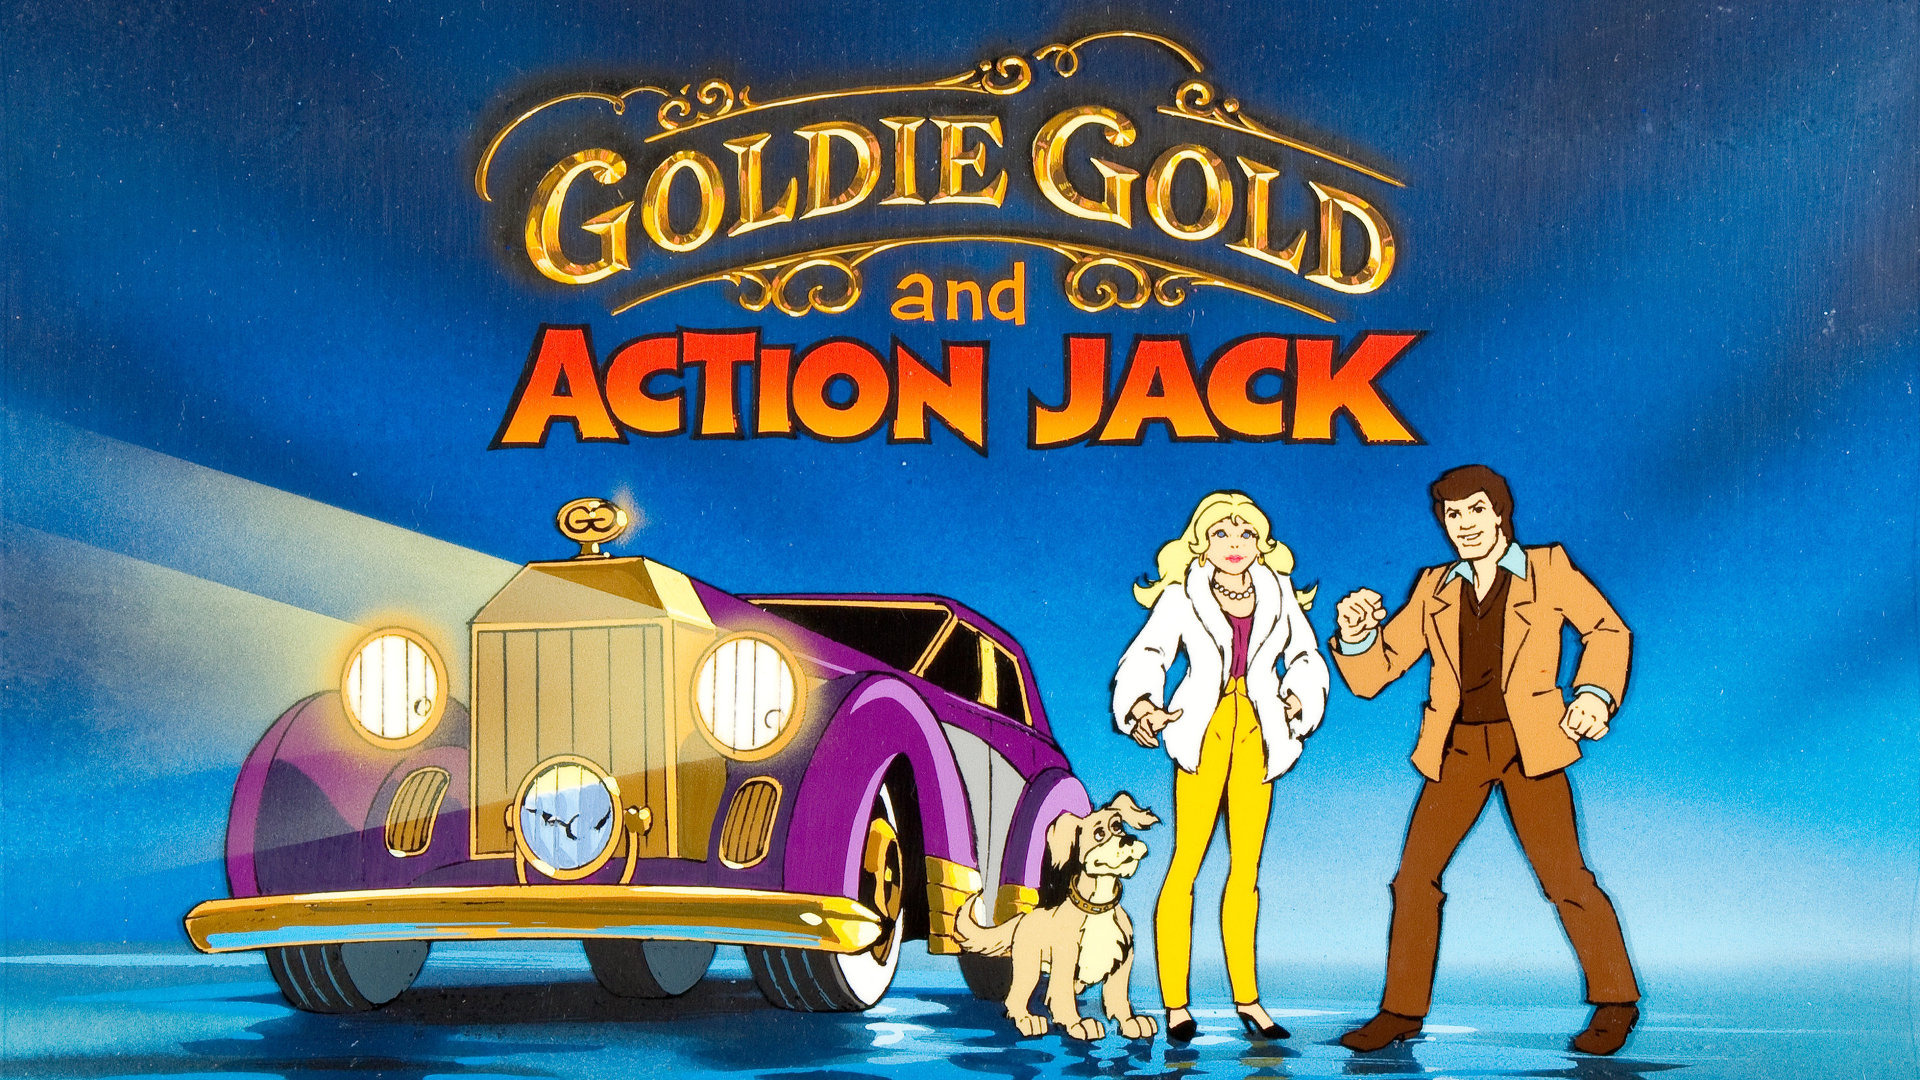 Show Goldie Gold and Action Jack